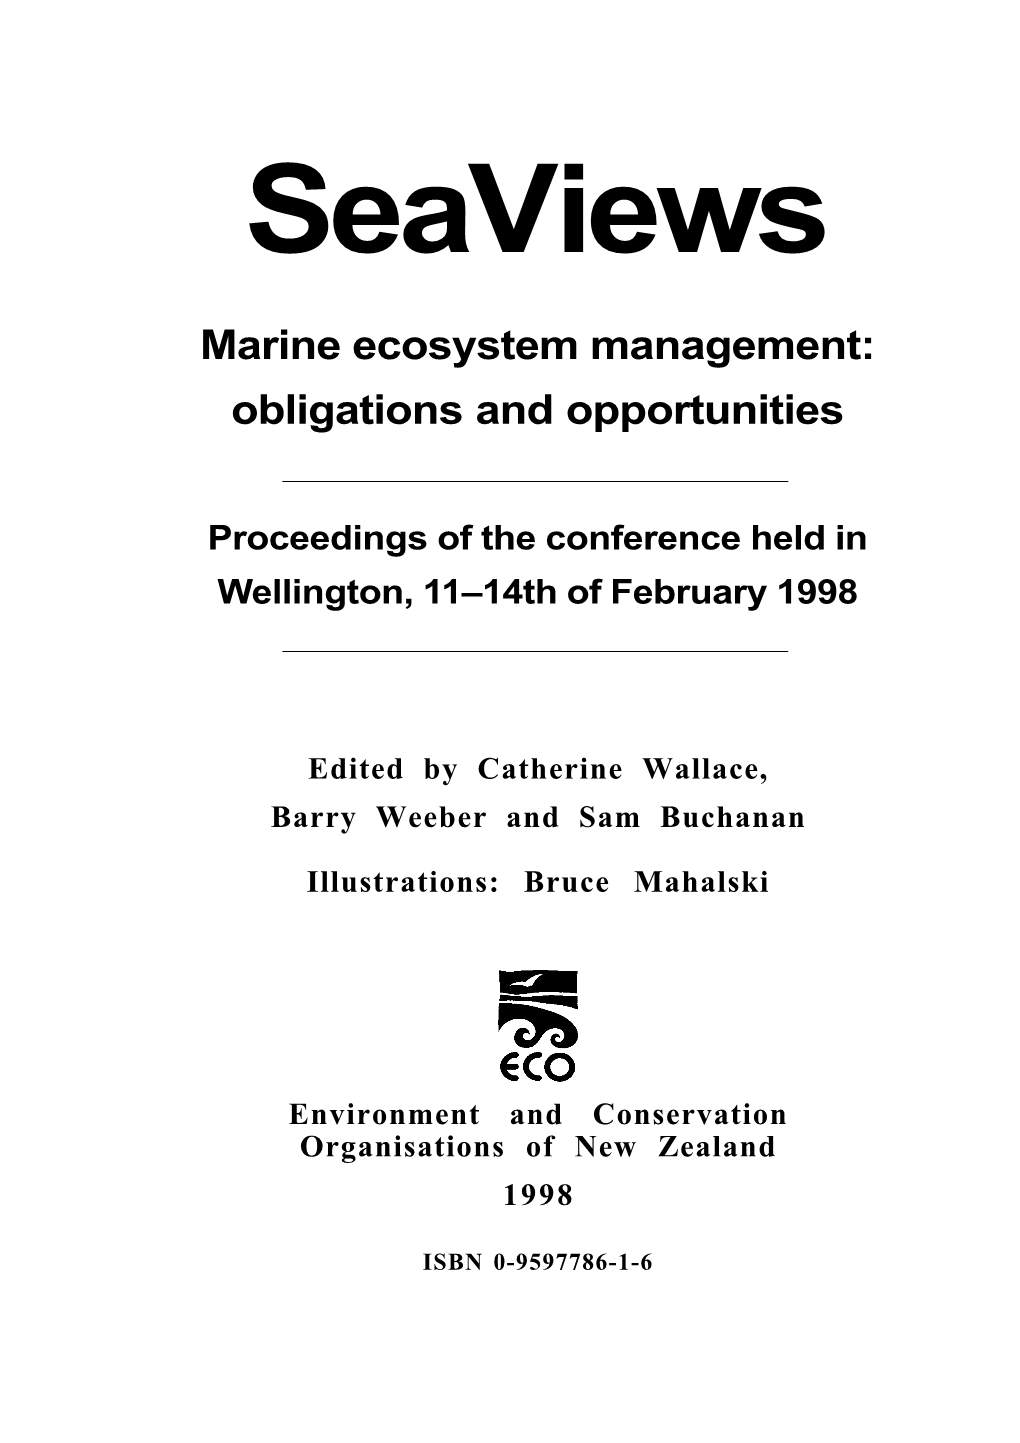 Marine Ecosystem Management: Obligations and Opportunities